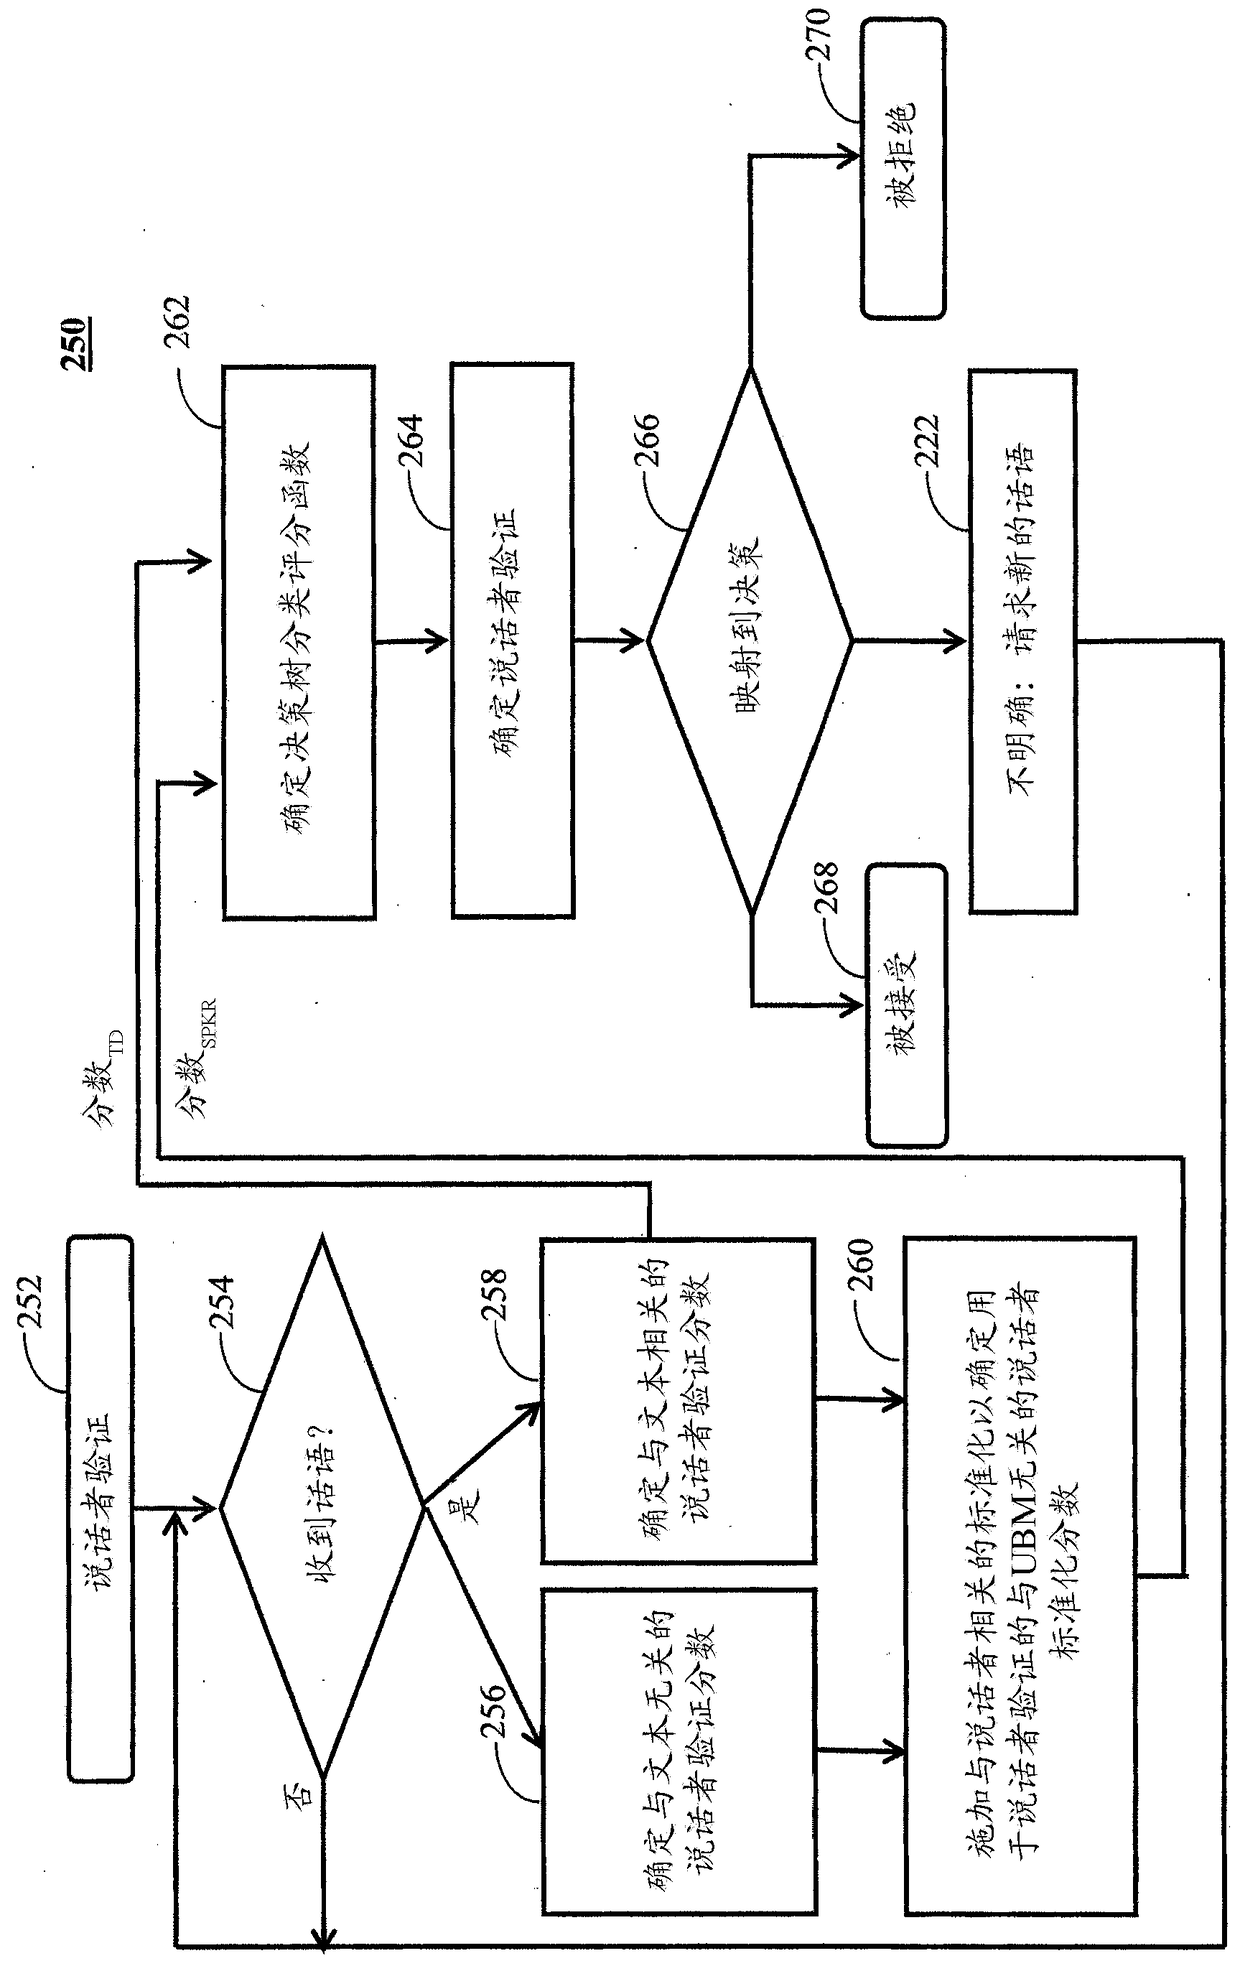 Dual scoring method and system for text-dependent speaker verification